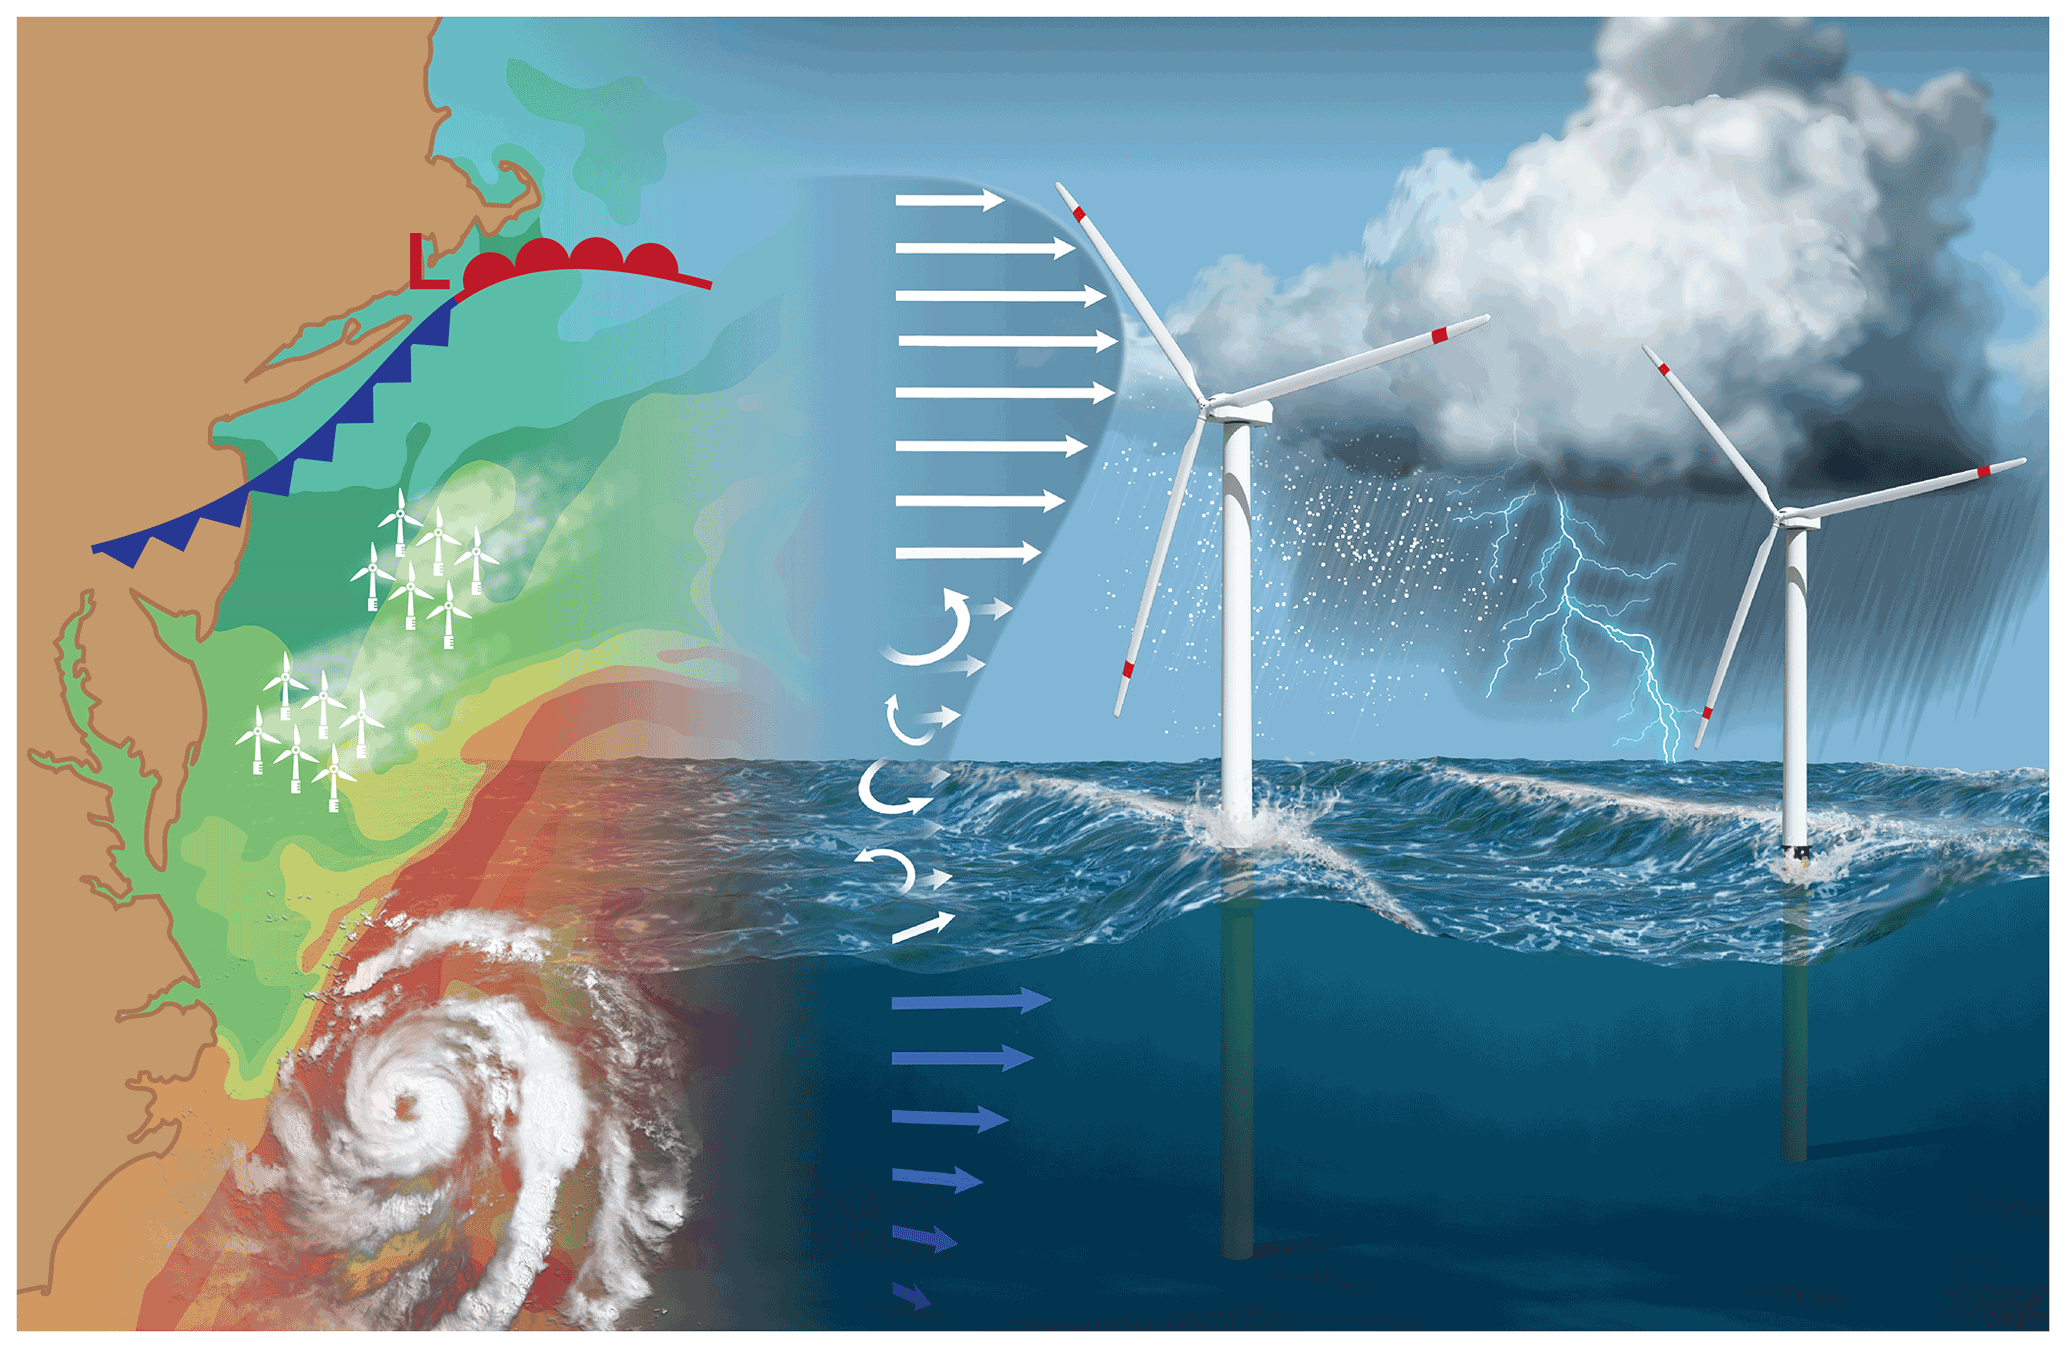 Image shows a depiction of wind turbines, a hurricane, wind, and a storm generating rain and lightning over turbines in the the ocean